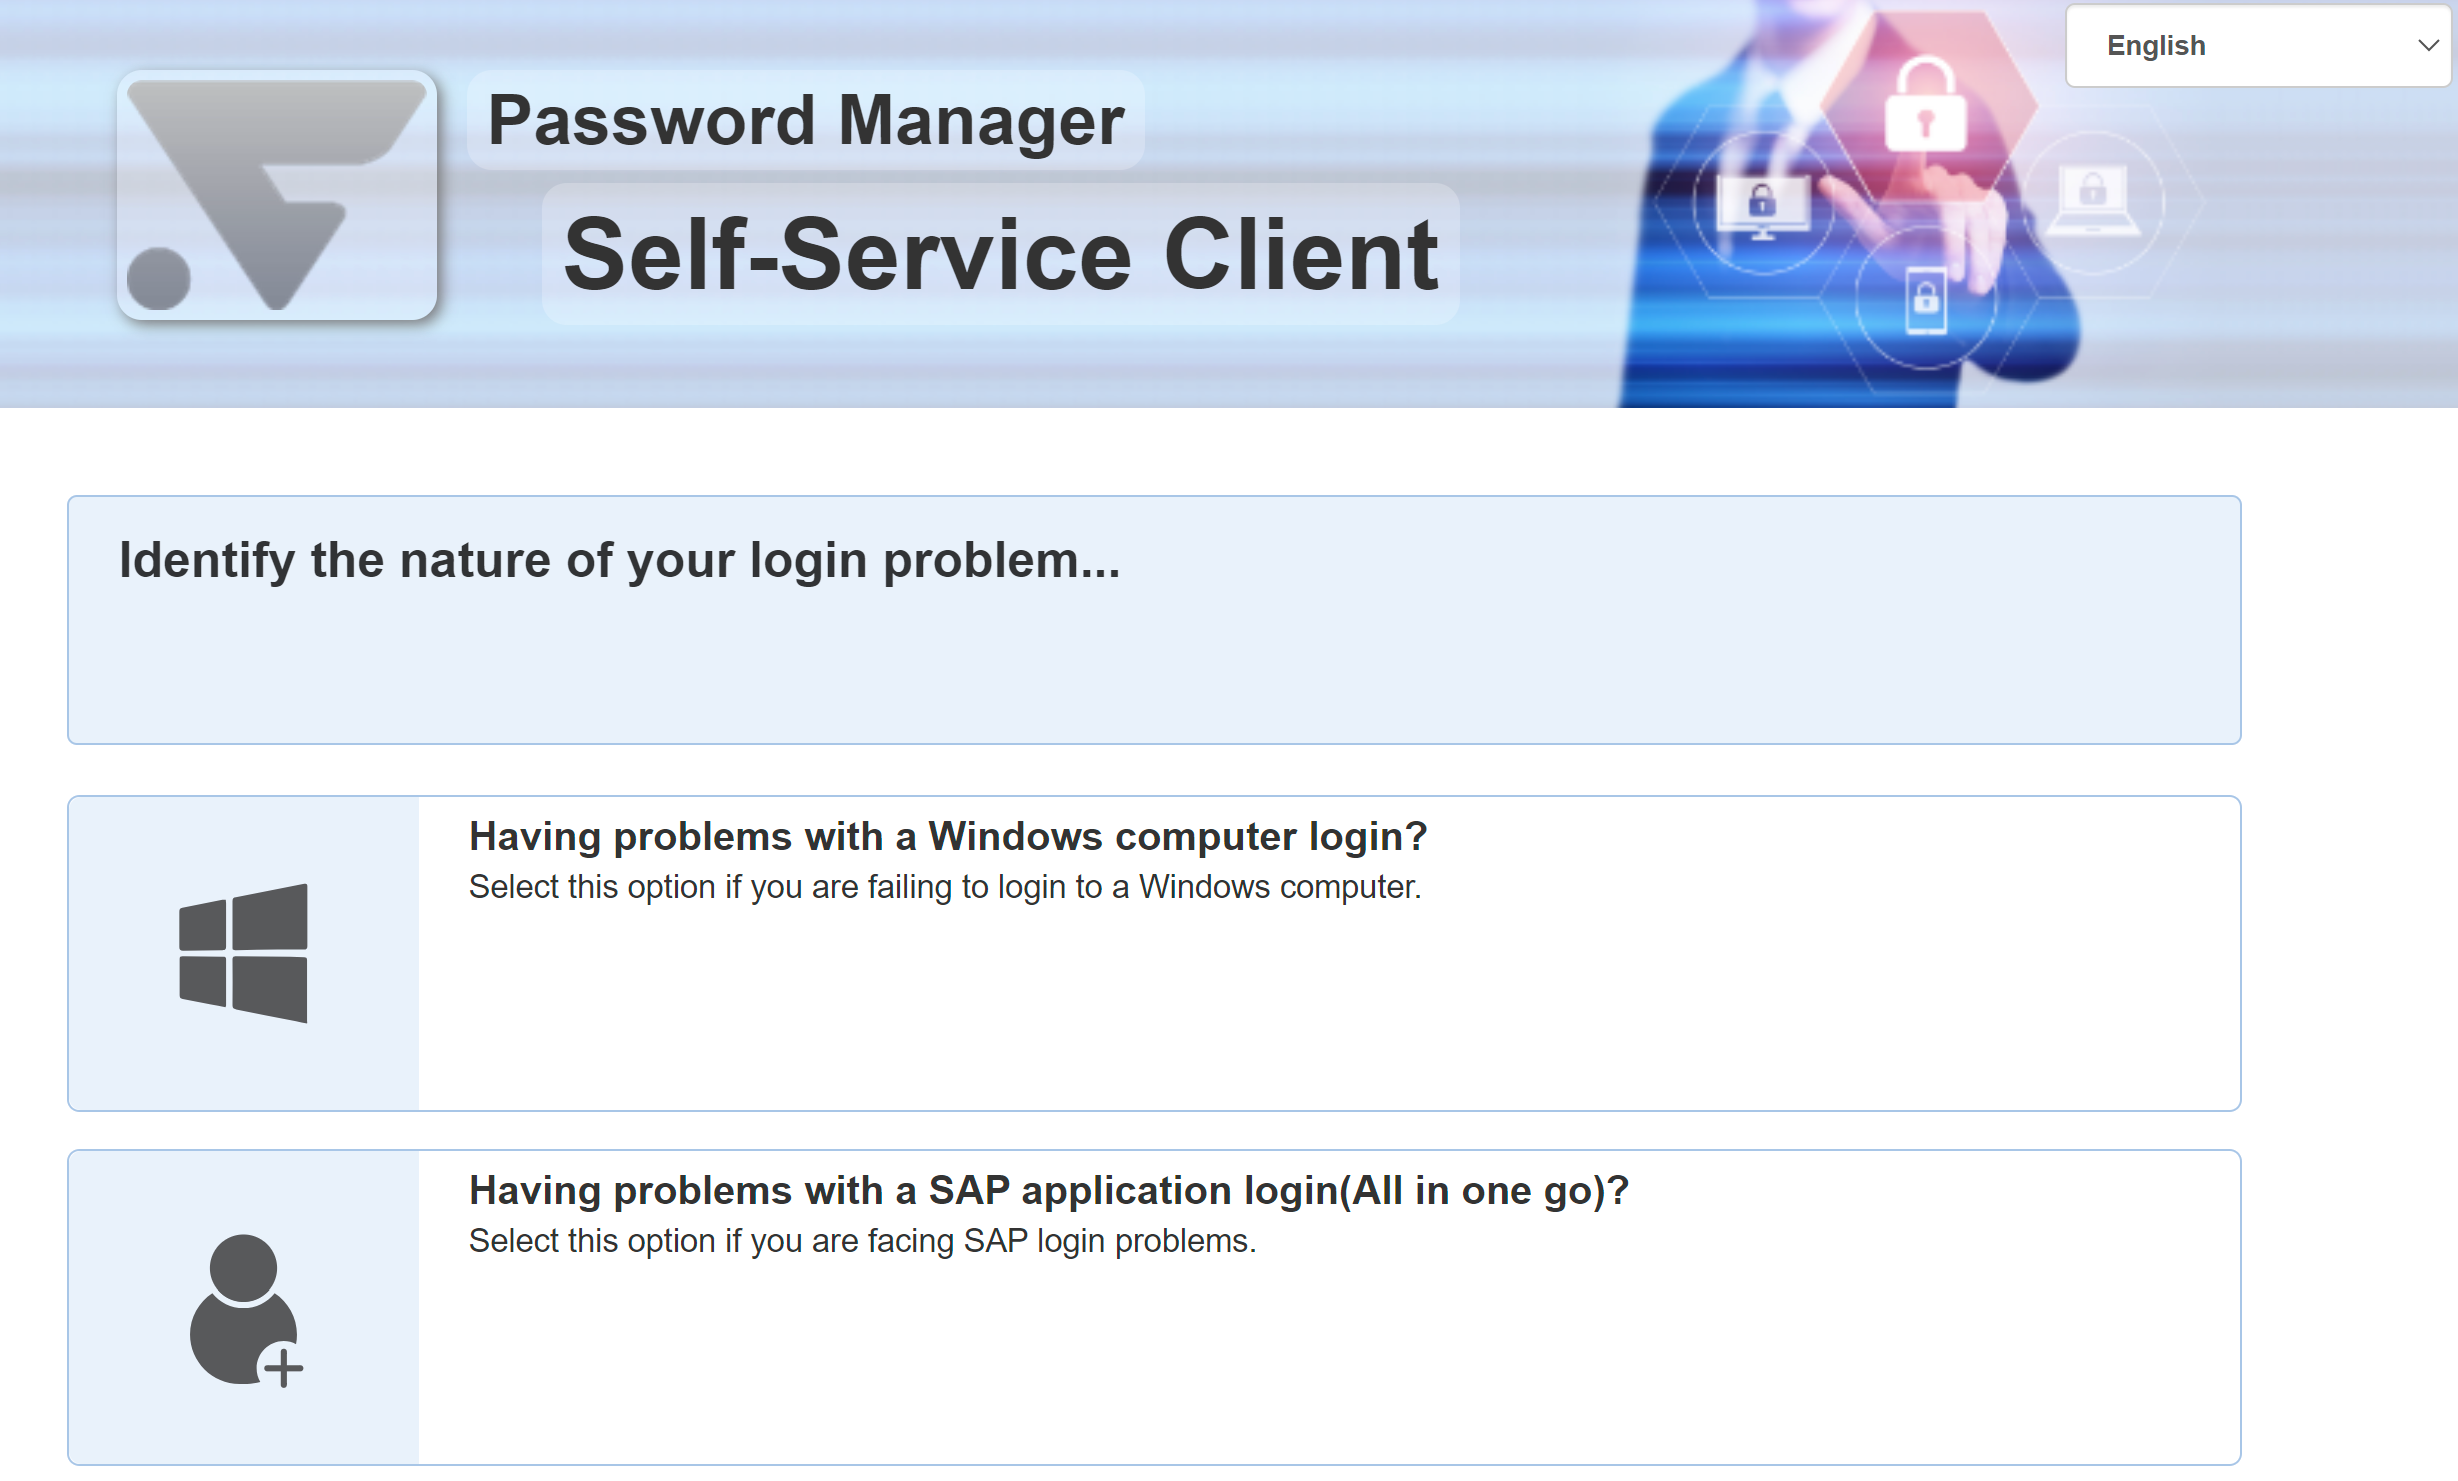 Self-Service of Windows or SAP example